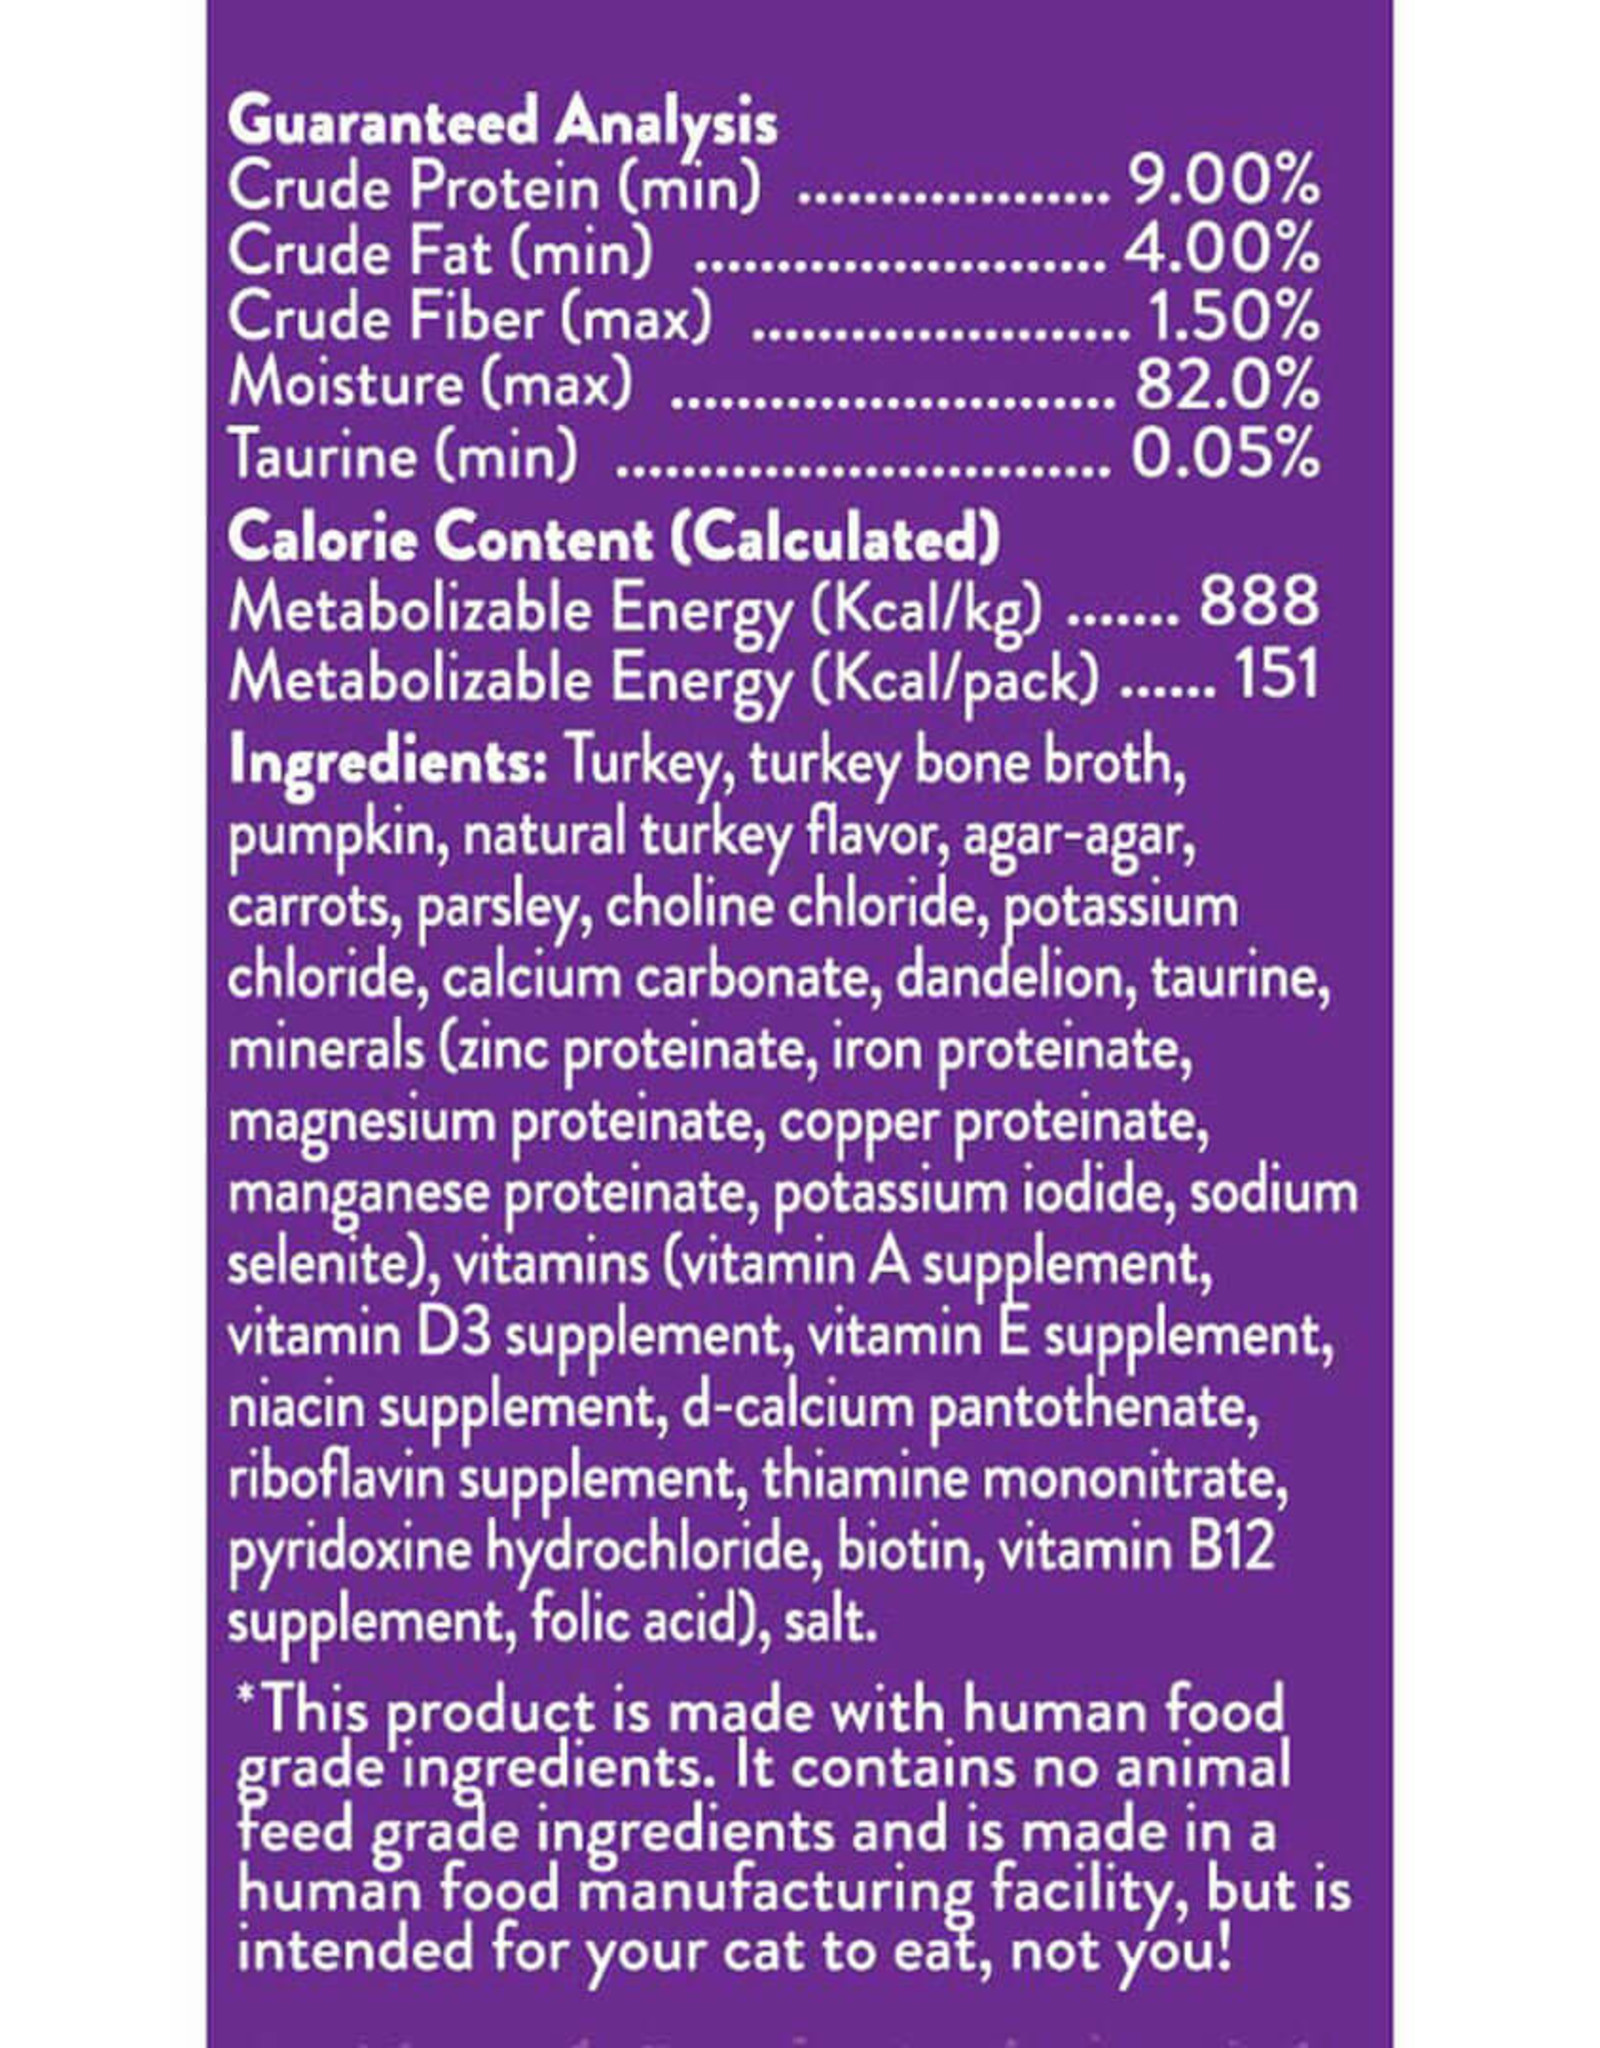 STELLA & CHEWY'S LLC STELLA & CHEWY'S CAT MARVELOUS MORSELS TURKEY 5.5OZ CASE OF 12 discontinued